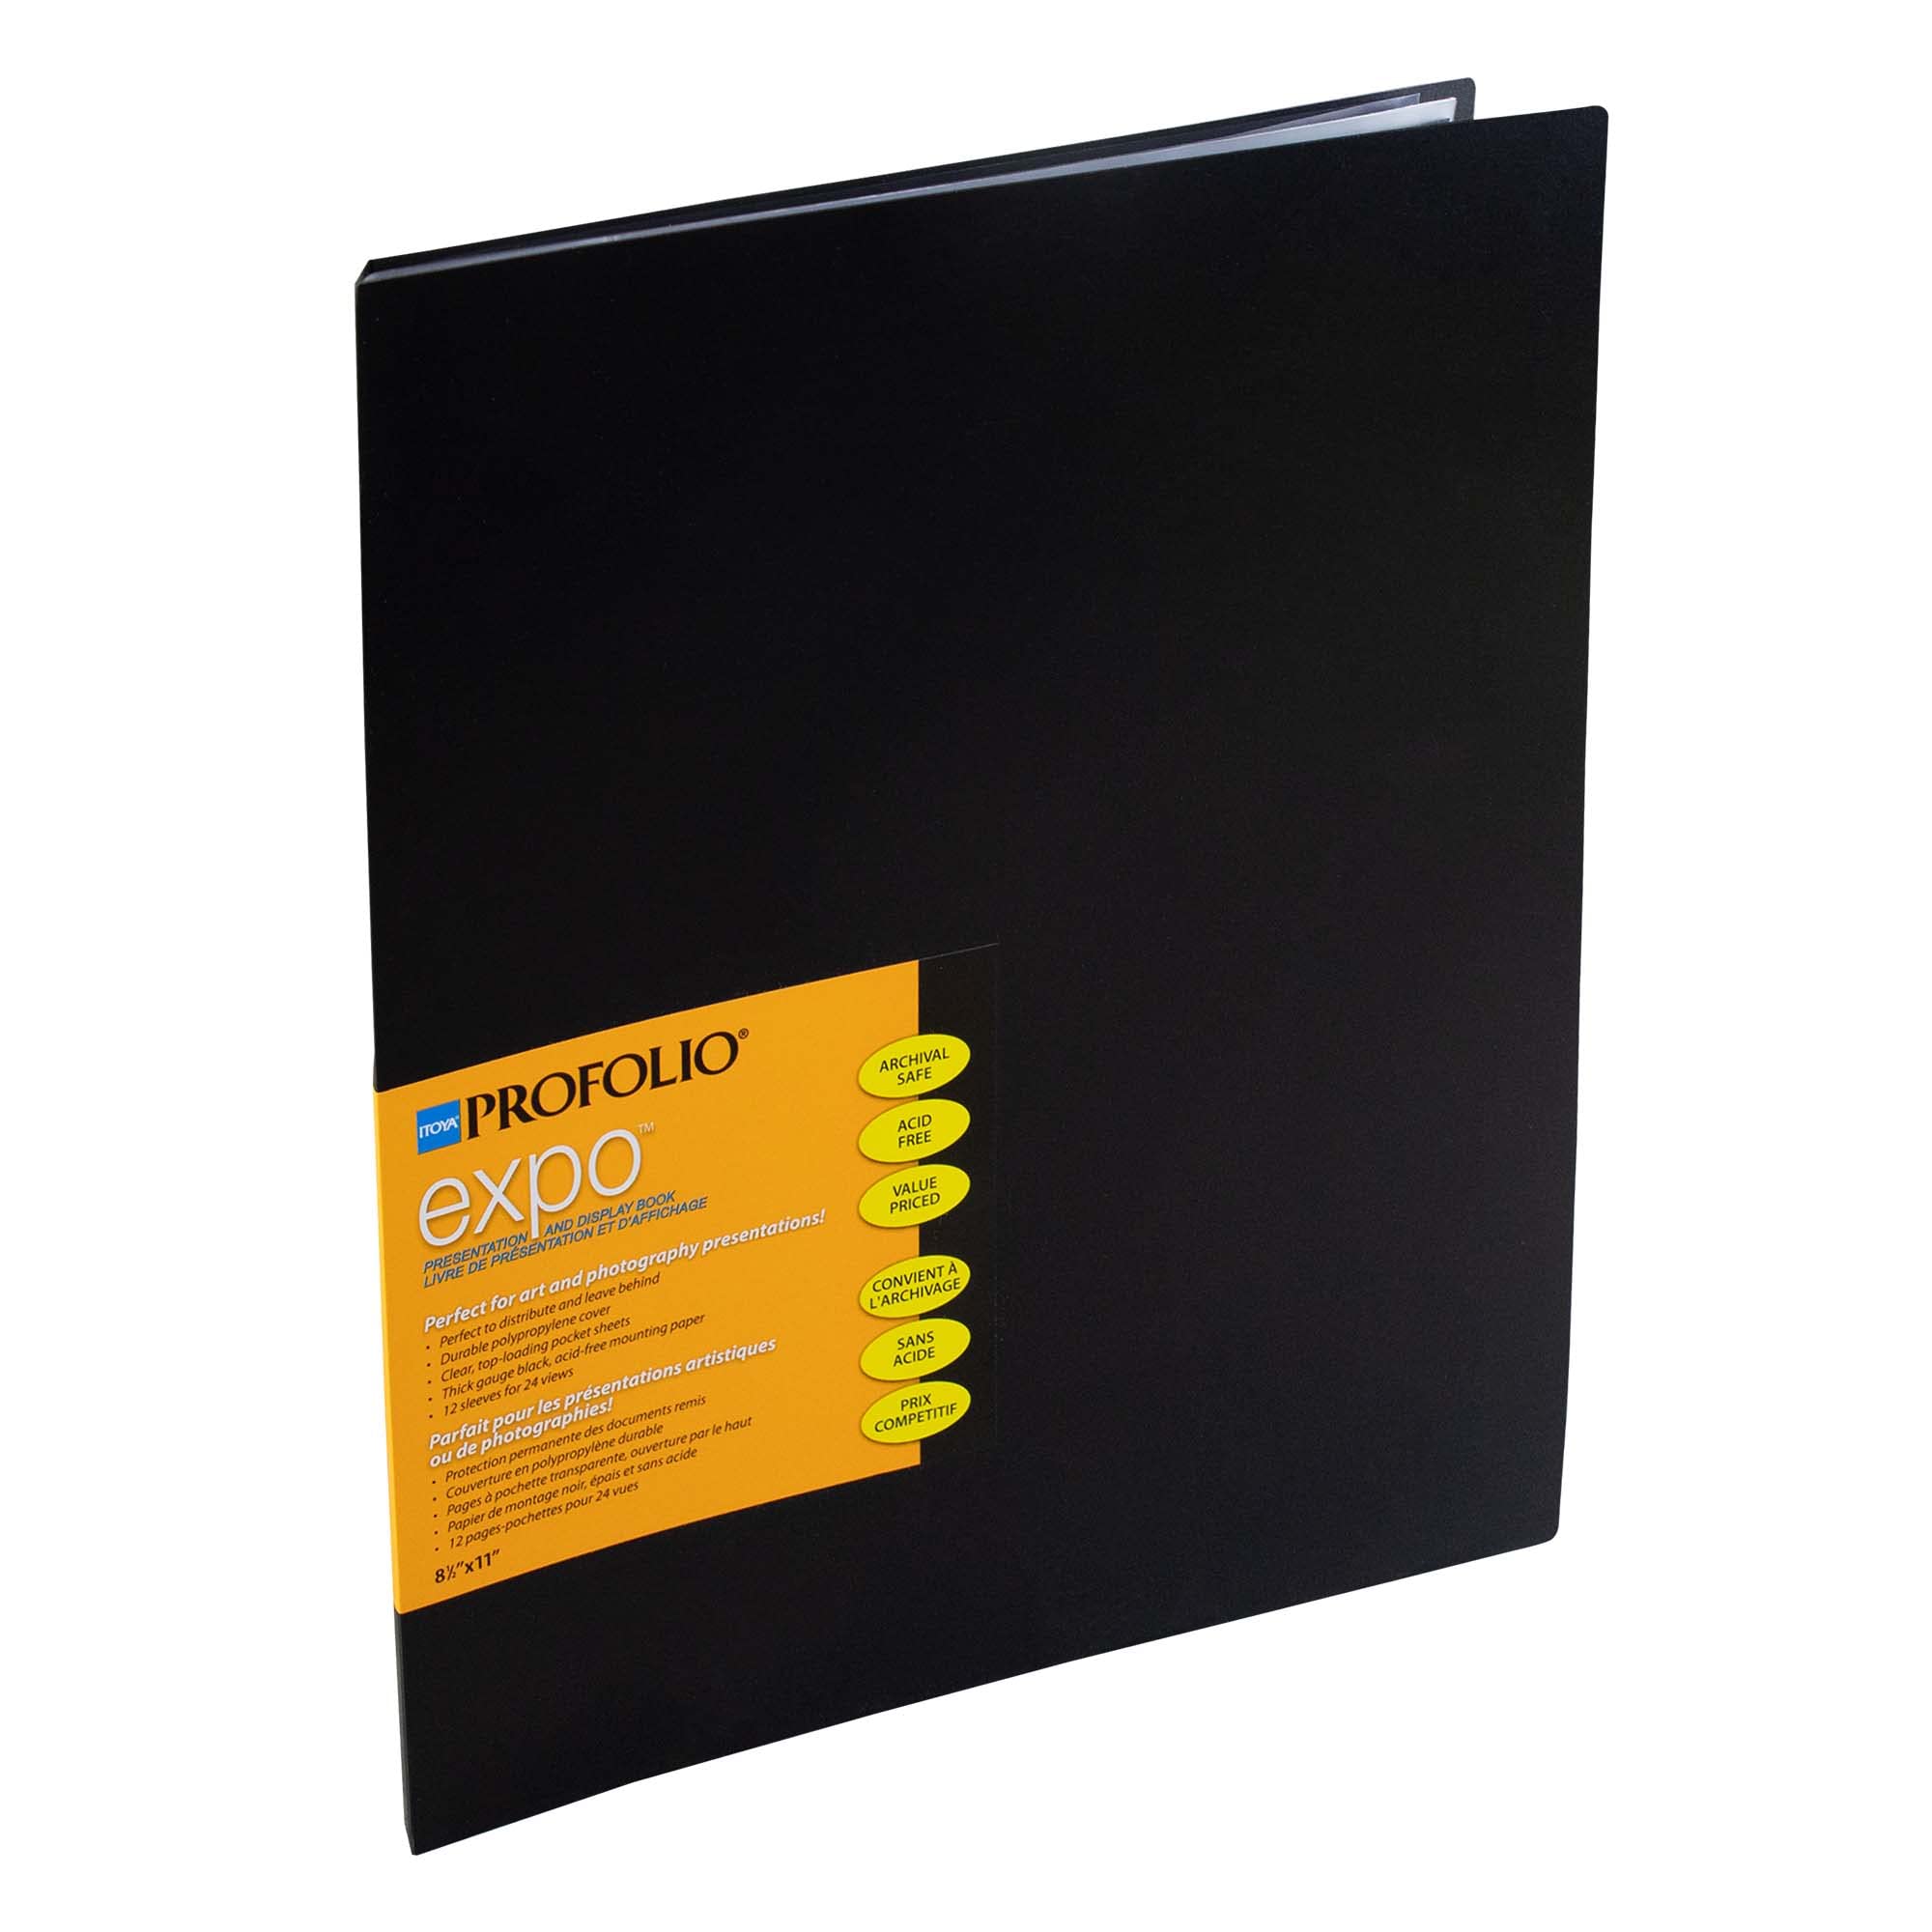 Itoya ProFolio Expo 8-1/2 x 11 Black Art Portfolio Binder with Plastic  Sleeves and 24 Pages - Portfolio Folder for Artwork with Clear Sheet  Protectors - Presentation Book for Art Display and Storage